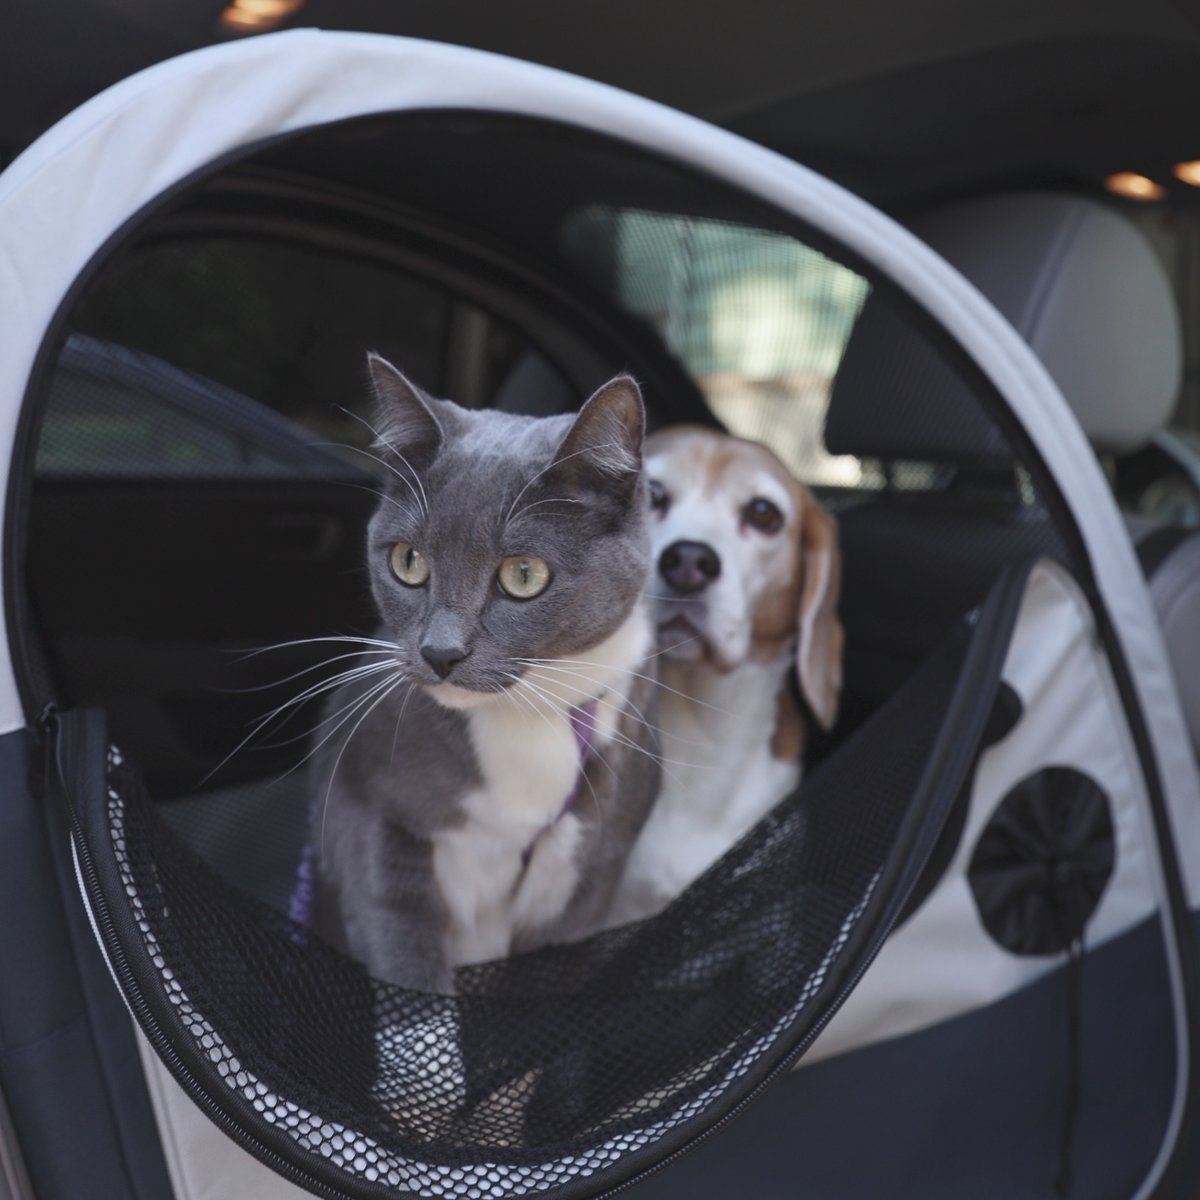 🐾GIVEAWAY 🐾 Want to win the Happy Ride Collapsible Travel Carrier? To enter: retweet, comment and follow @PetSafeUK #Giveaway #Competiton